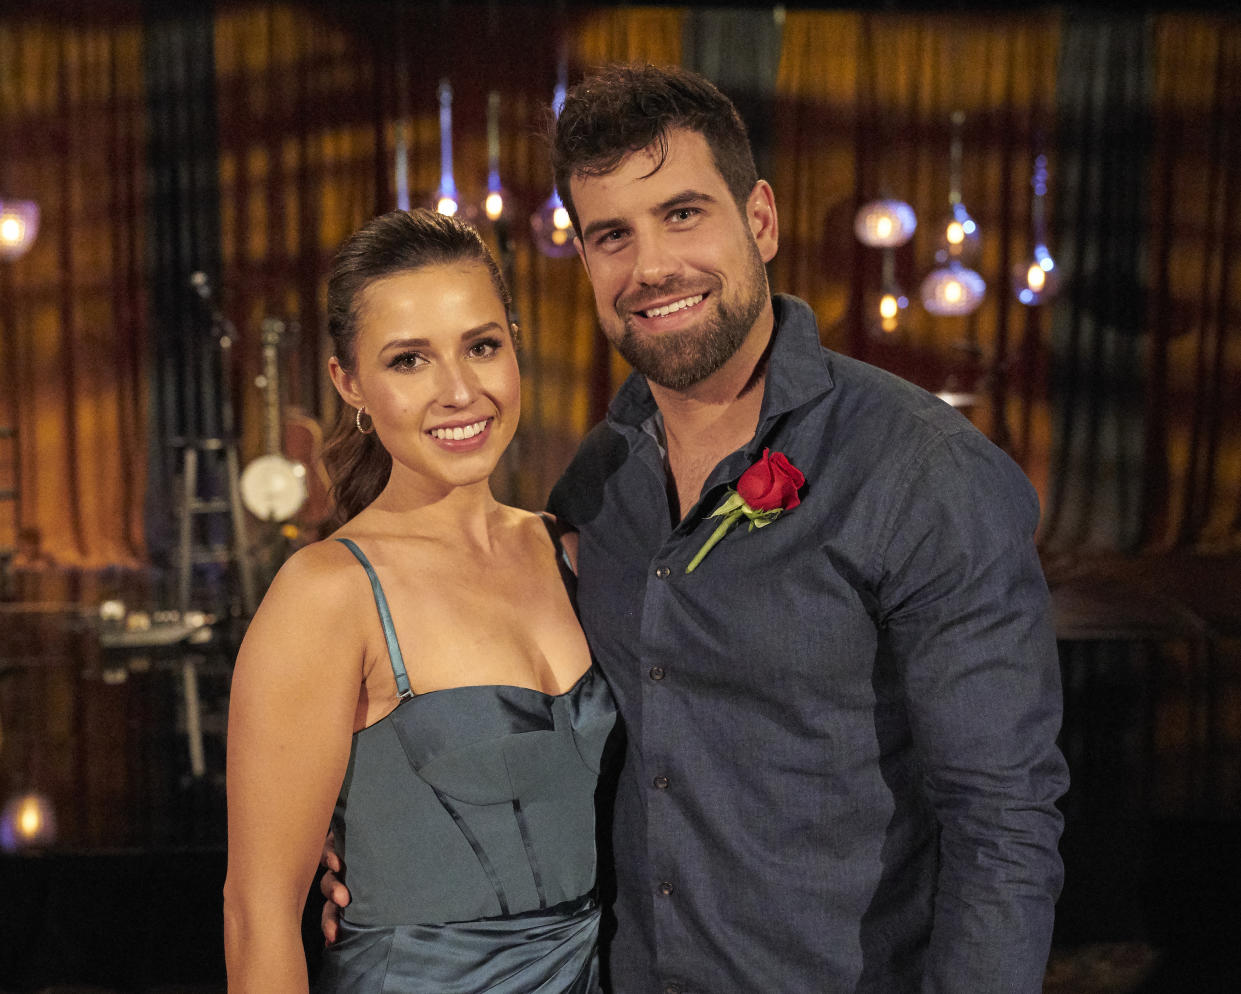 Katie Thurston's journey to find love on The Bachelorette has finally ended with an engagement to contestant Blake Moynes. Now, the couple is fielding intimate questions about their sex life. (Craig Sjodin/ABC via Getty Images) 